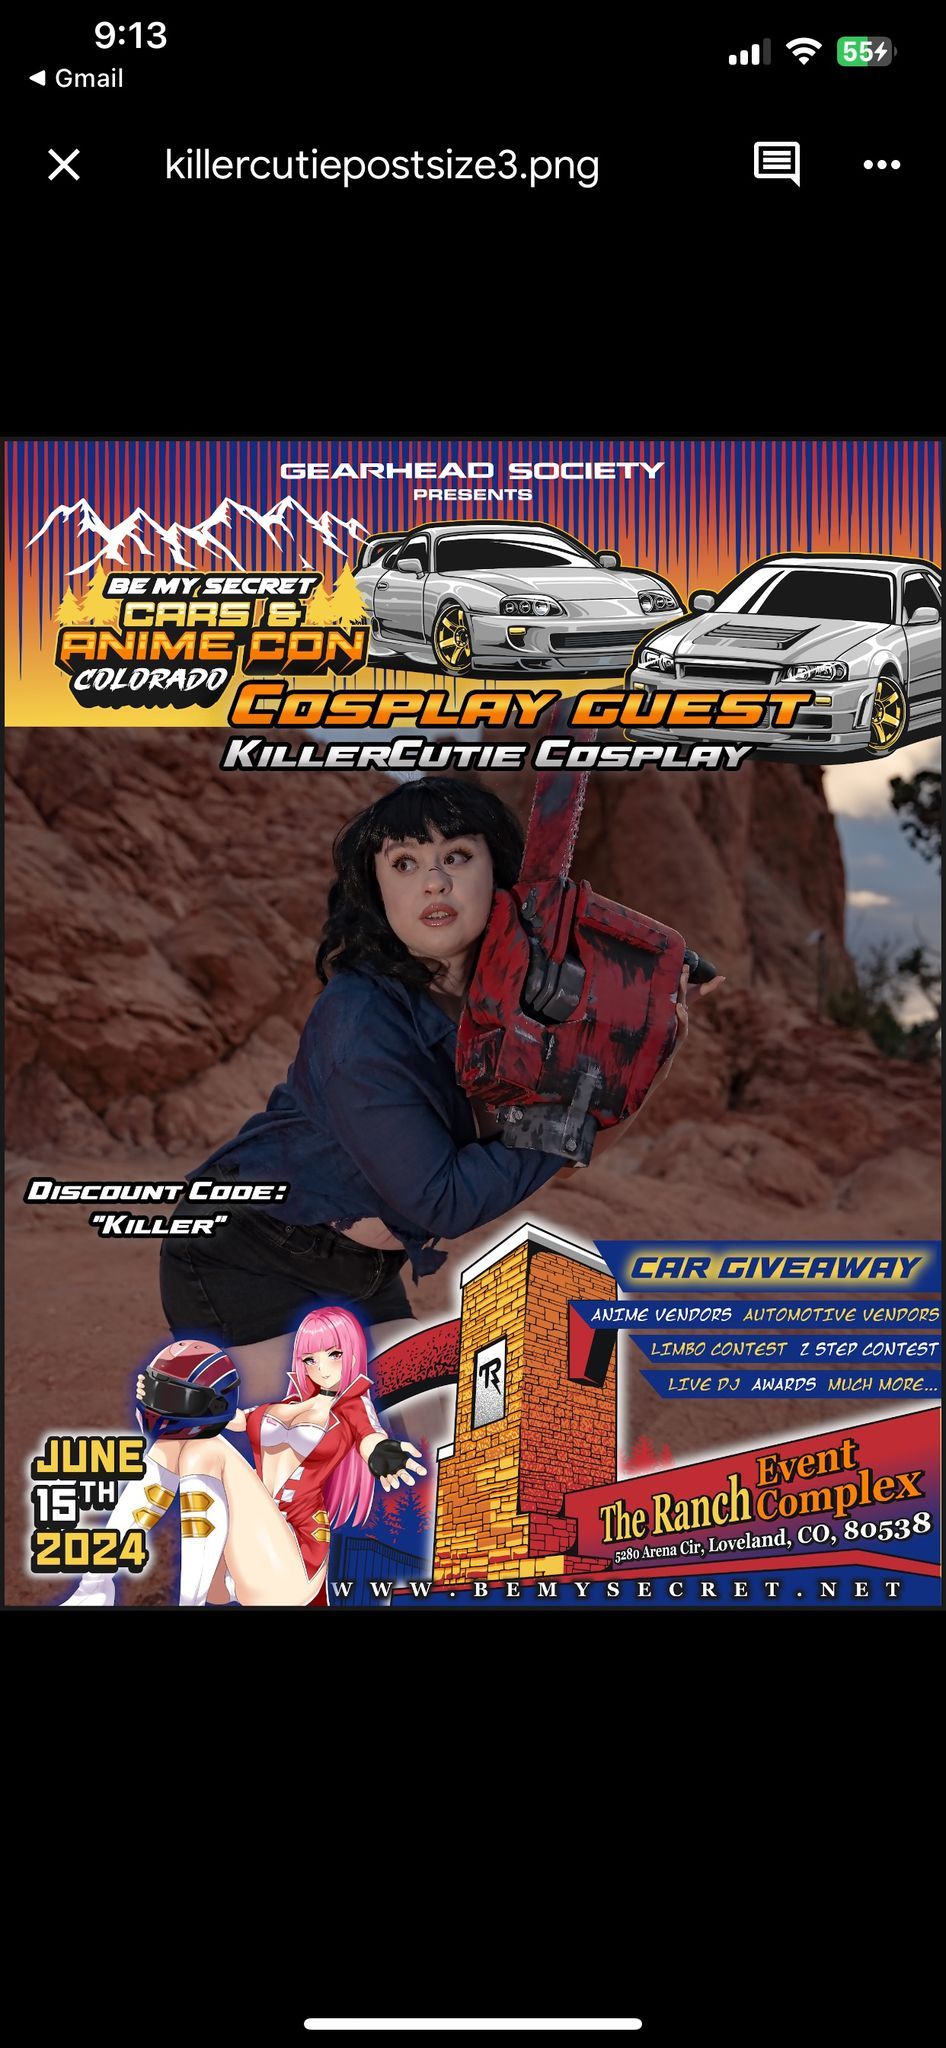 BeMySecret Cars and Anime Con